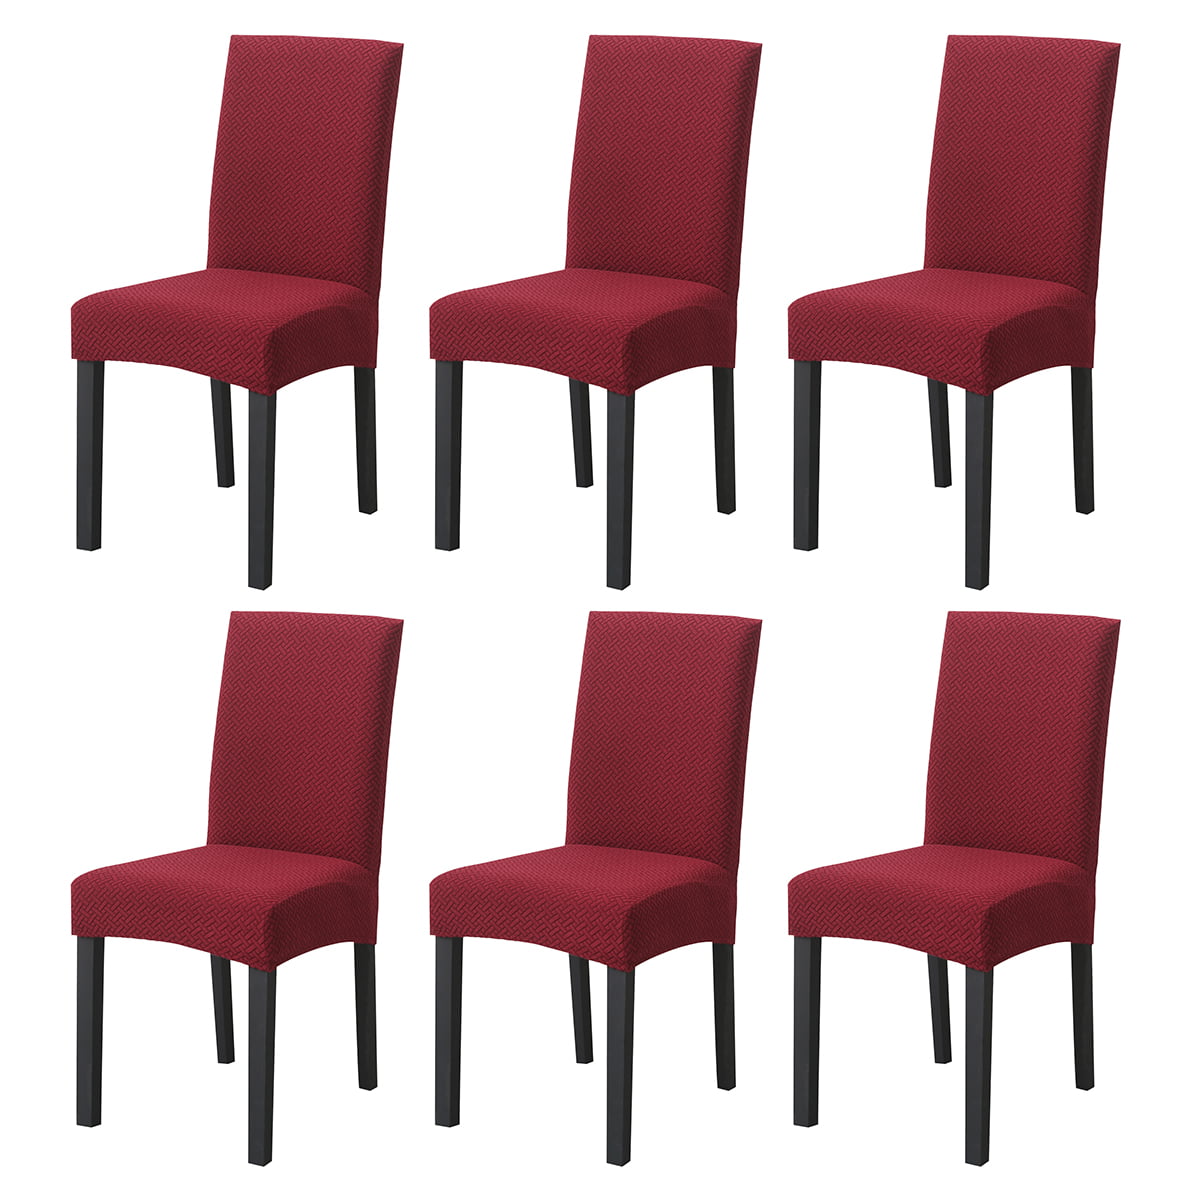 BW#A Wine Red Knitted Stretch Chair Cover Restaurant Hotel Elastic Seat Covers 